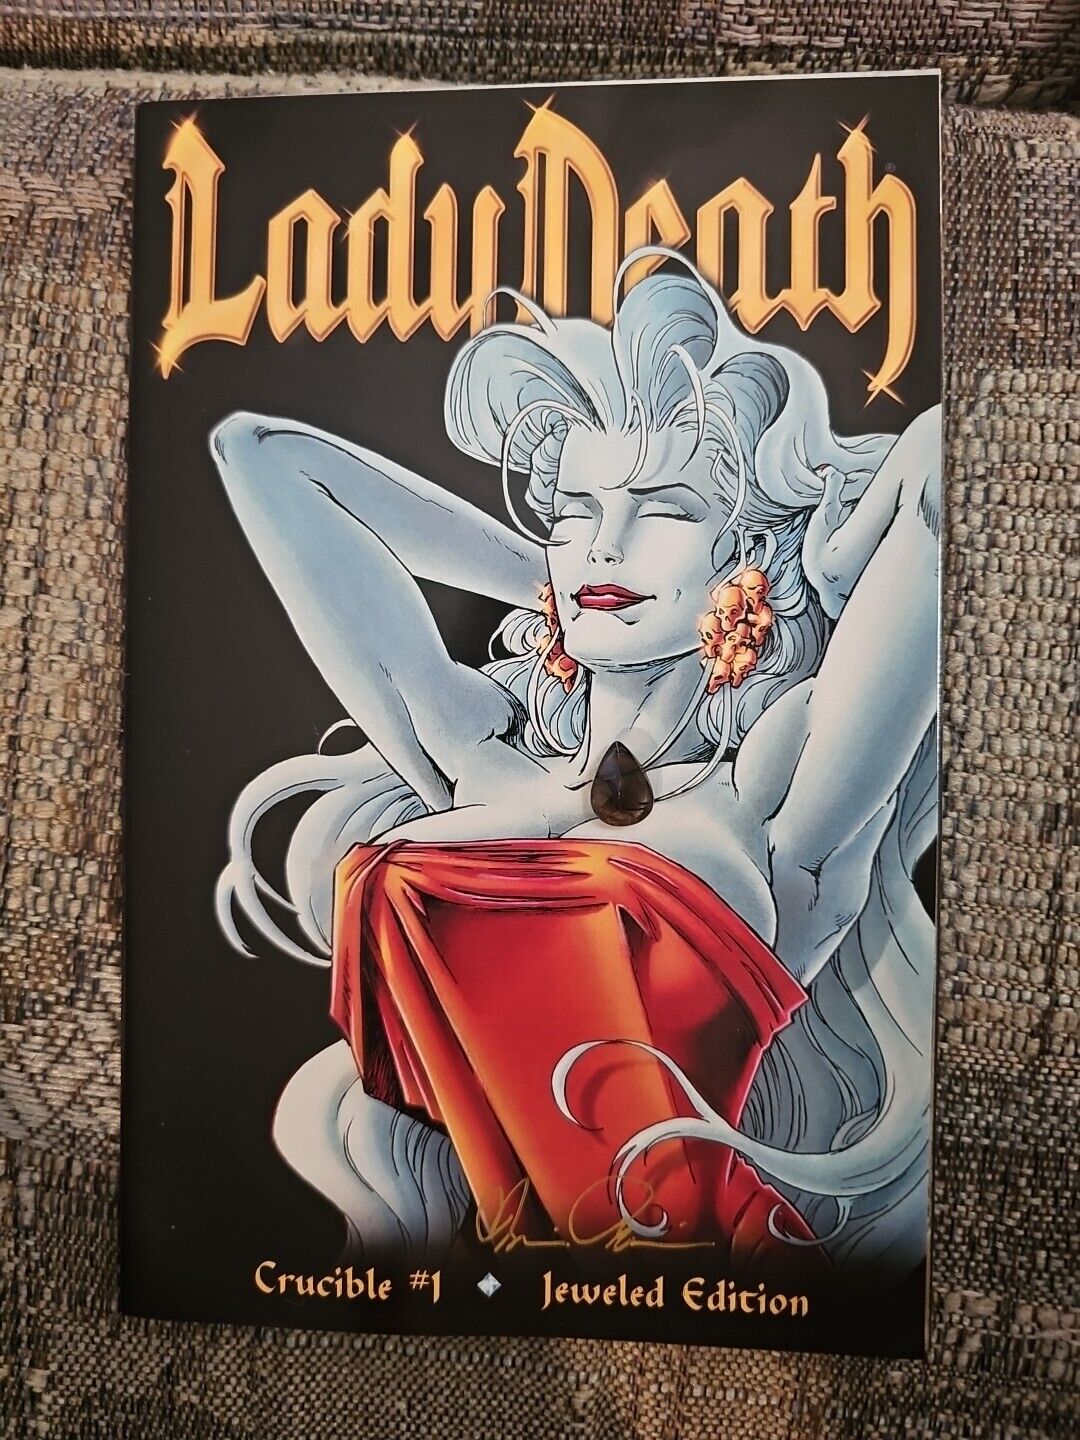 Lady Death Crucible 1 Coffin Comics Jeweled Edition Very Rare. 4 Out 50,Real Gem